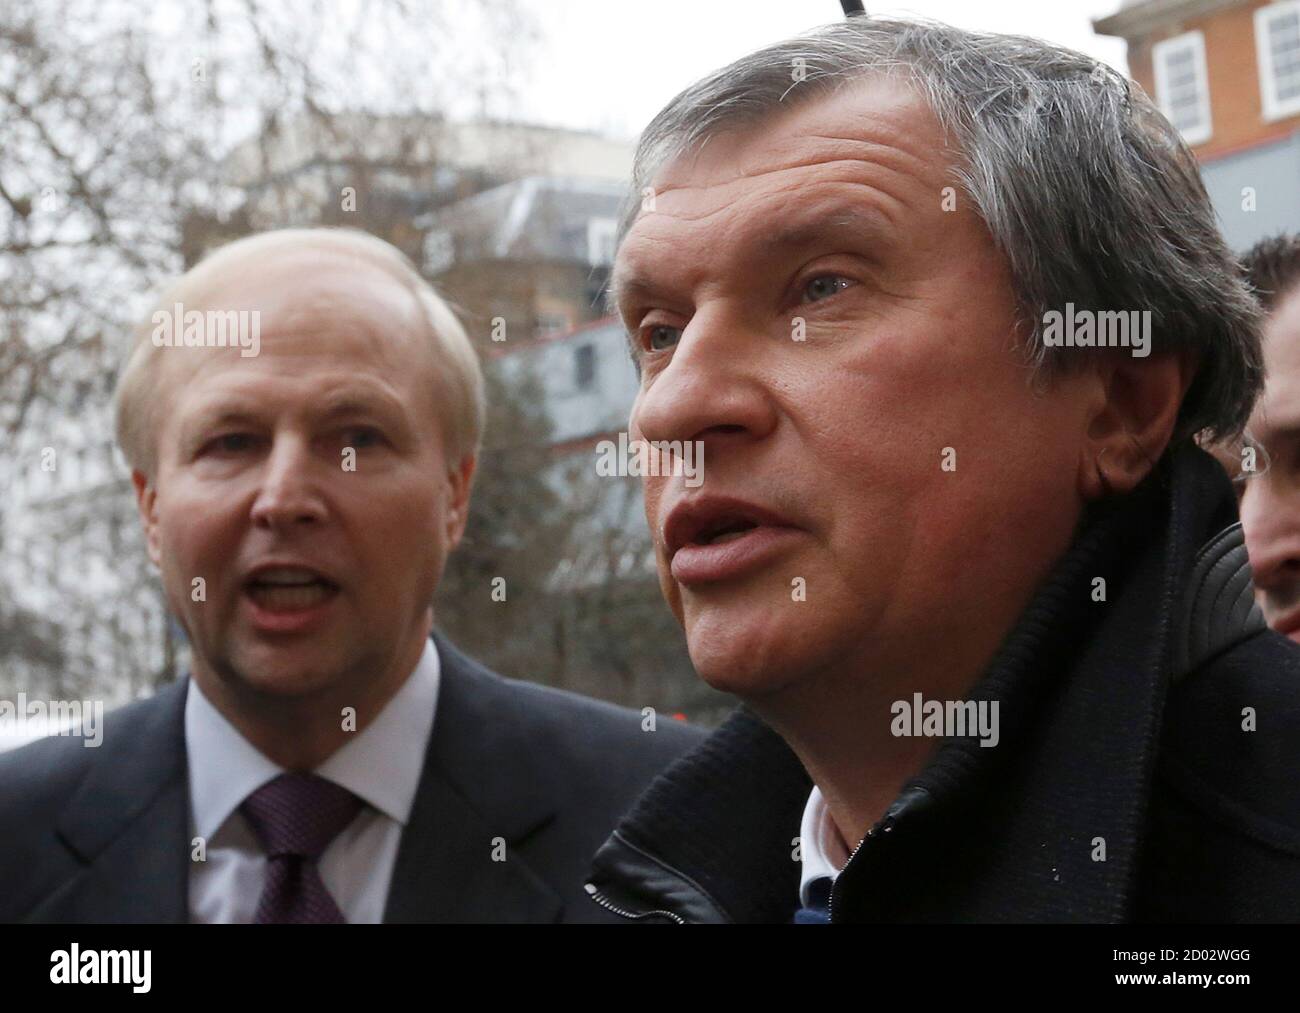 British Petroleum CEO Bob Dudley and Rosneft CEO Igor Sechin (R) speak to journalists as they arrive outside the BP headquarters in central London March 21, 2013. Russian state oil company Rosneft closed its deal to buy TNK-BP from UK-based BP and four tycoons on Thursday, releasing $40 billion cash to the sellers and becoming a bigger oil producer than Exxon Mobil. The $55 billion deal, which also gives BP a near 20 percent stake in Rosneft, was announced last year after months of on-off negotiations. It is the biggest in Russia's corporate history.. REUTERS/Olivia Harris (BRITAIN - Tags: BUS Stock Photo